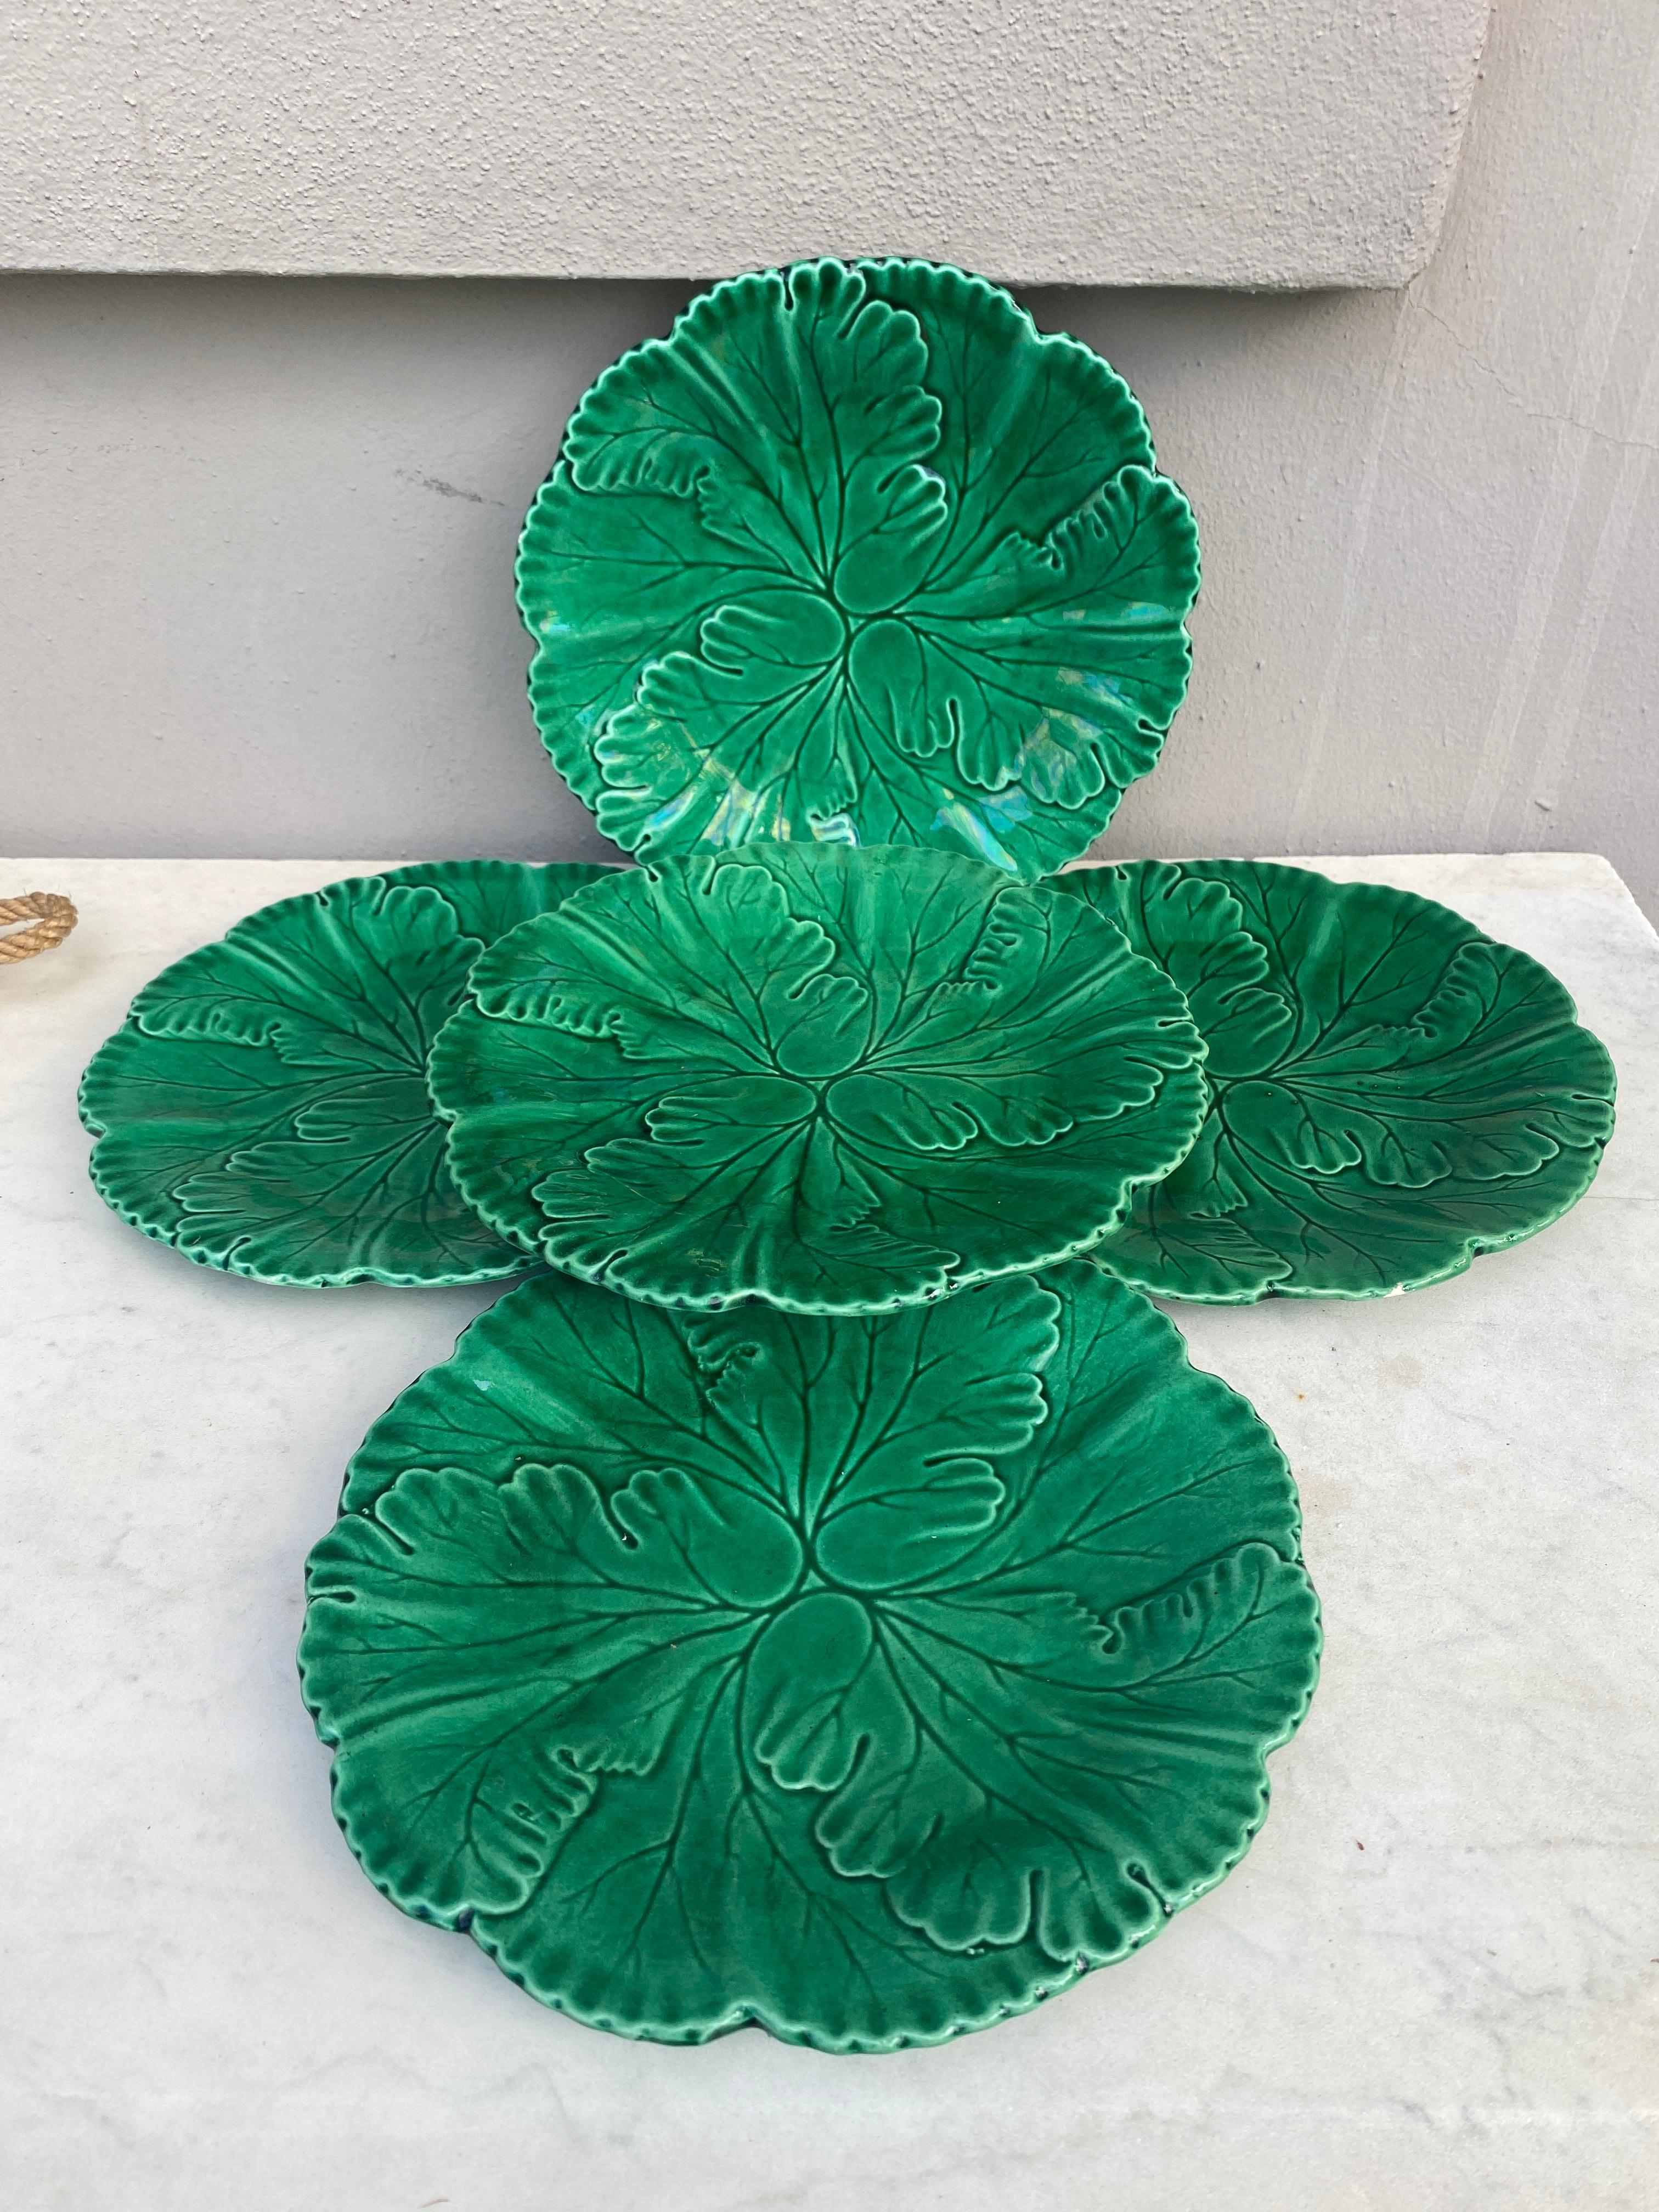 French Green Majolica Leaves Plate Clairefontaine, circa 1890.
8 plates available.